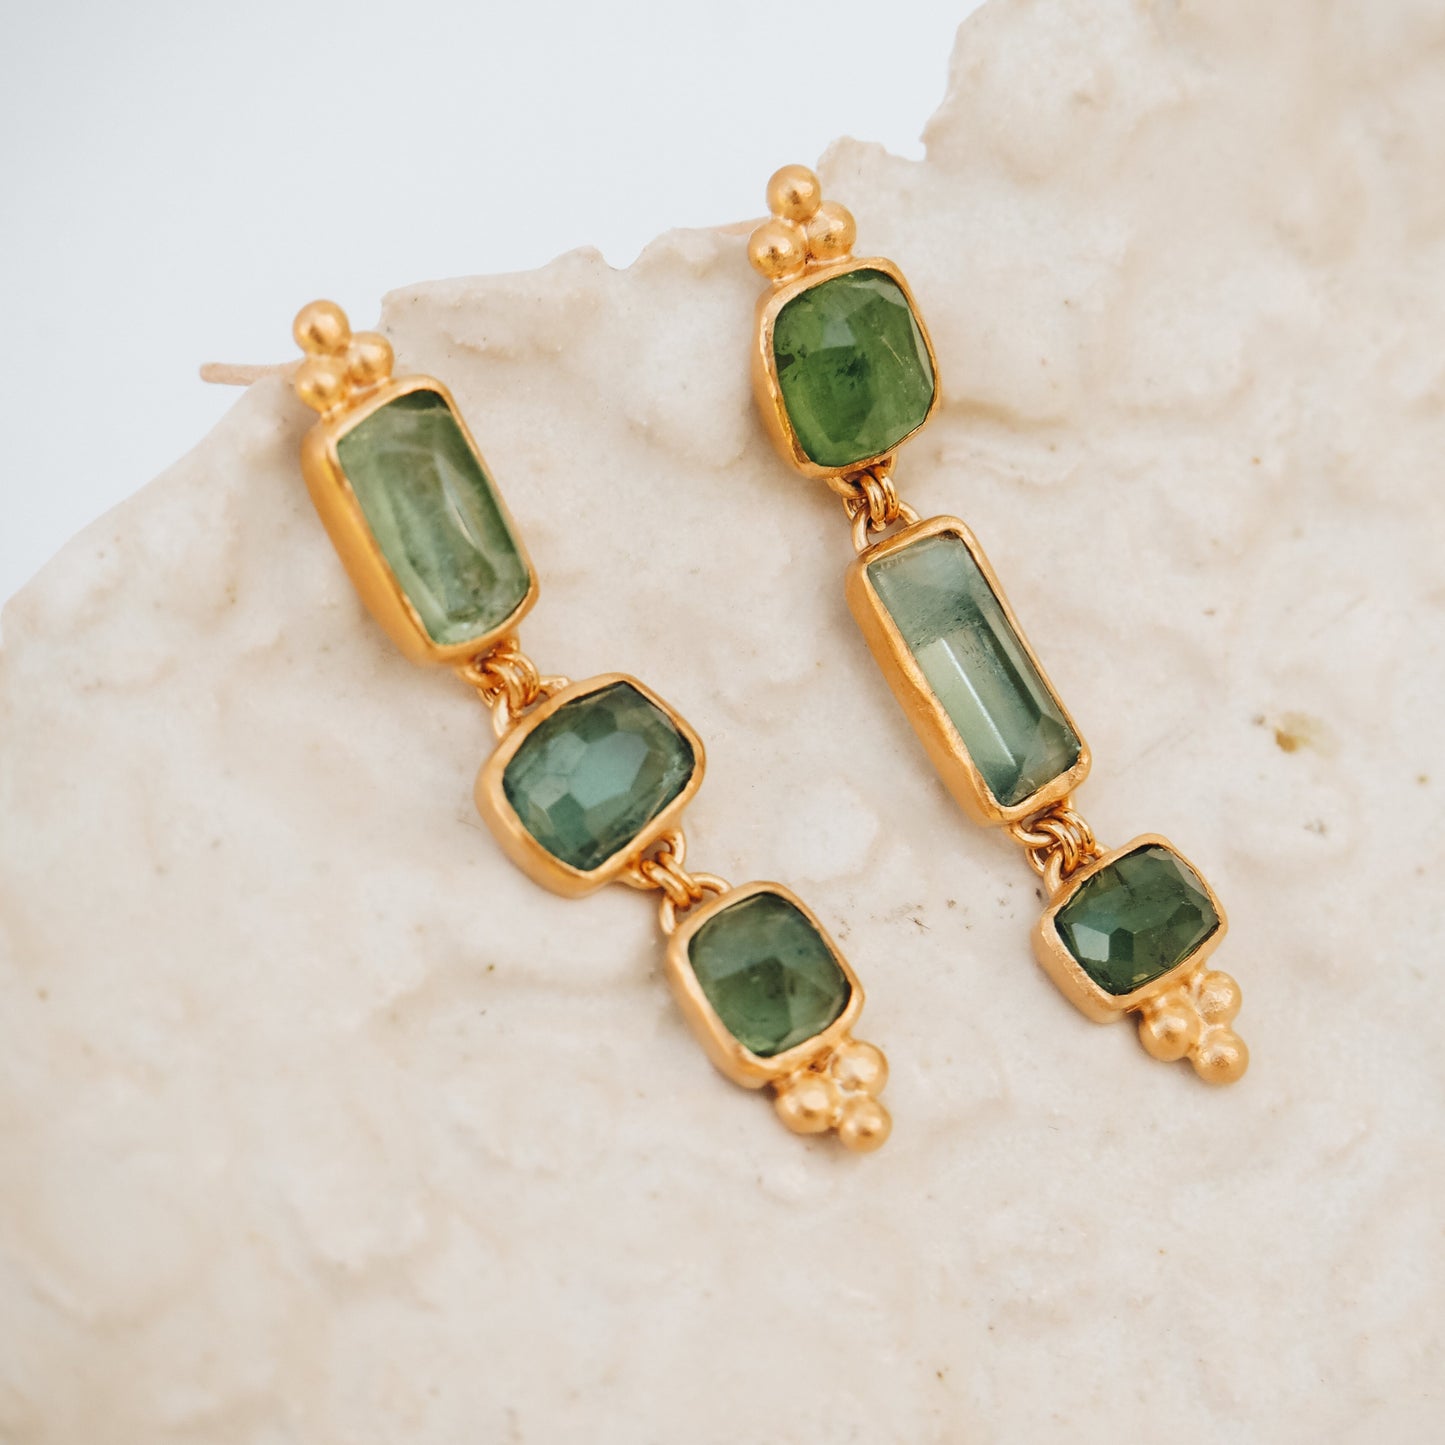 Unique gold drop earrings with square rose cut tourmaline gemstones in ocean blue and green, enhanced with granulation detailing.